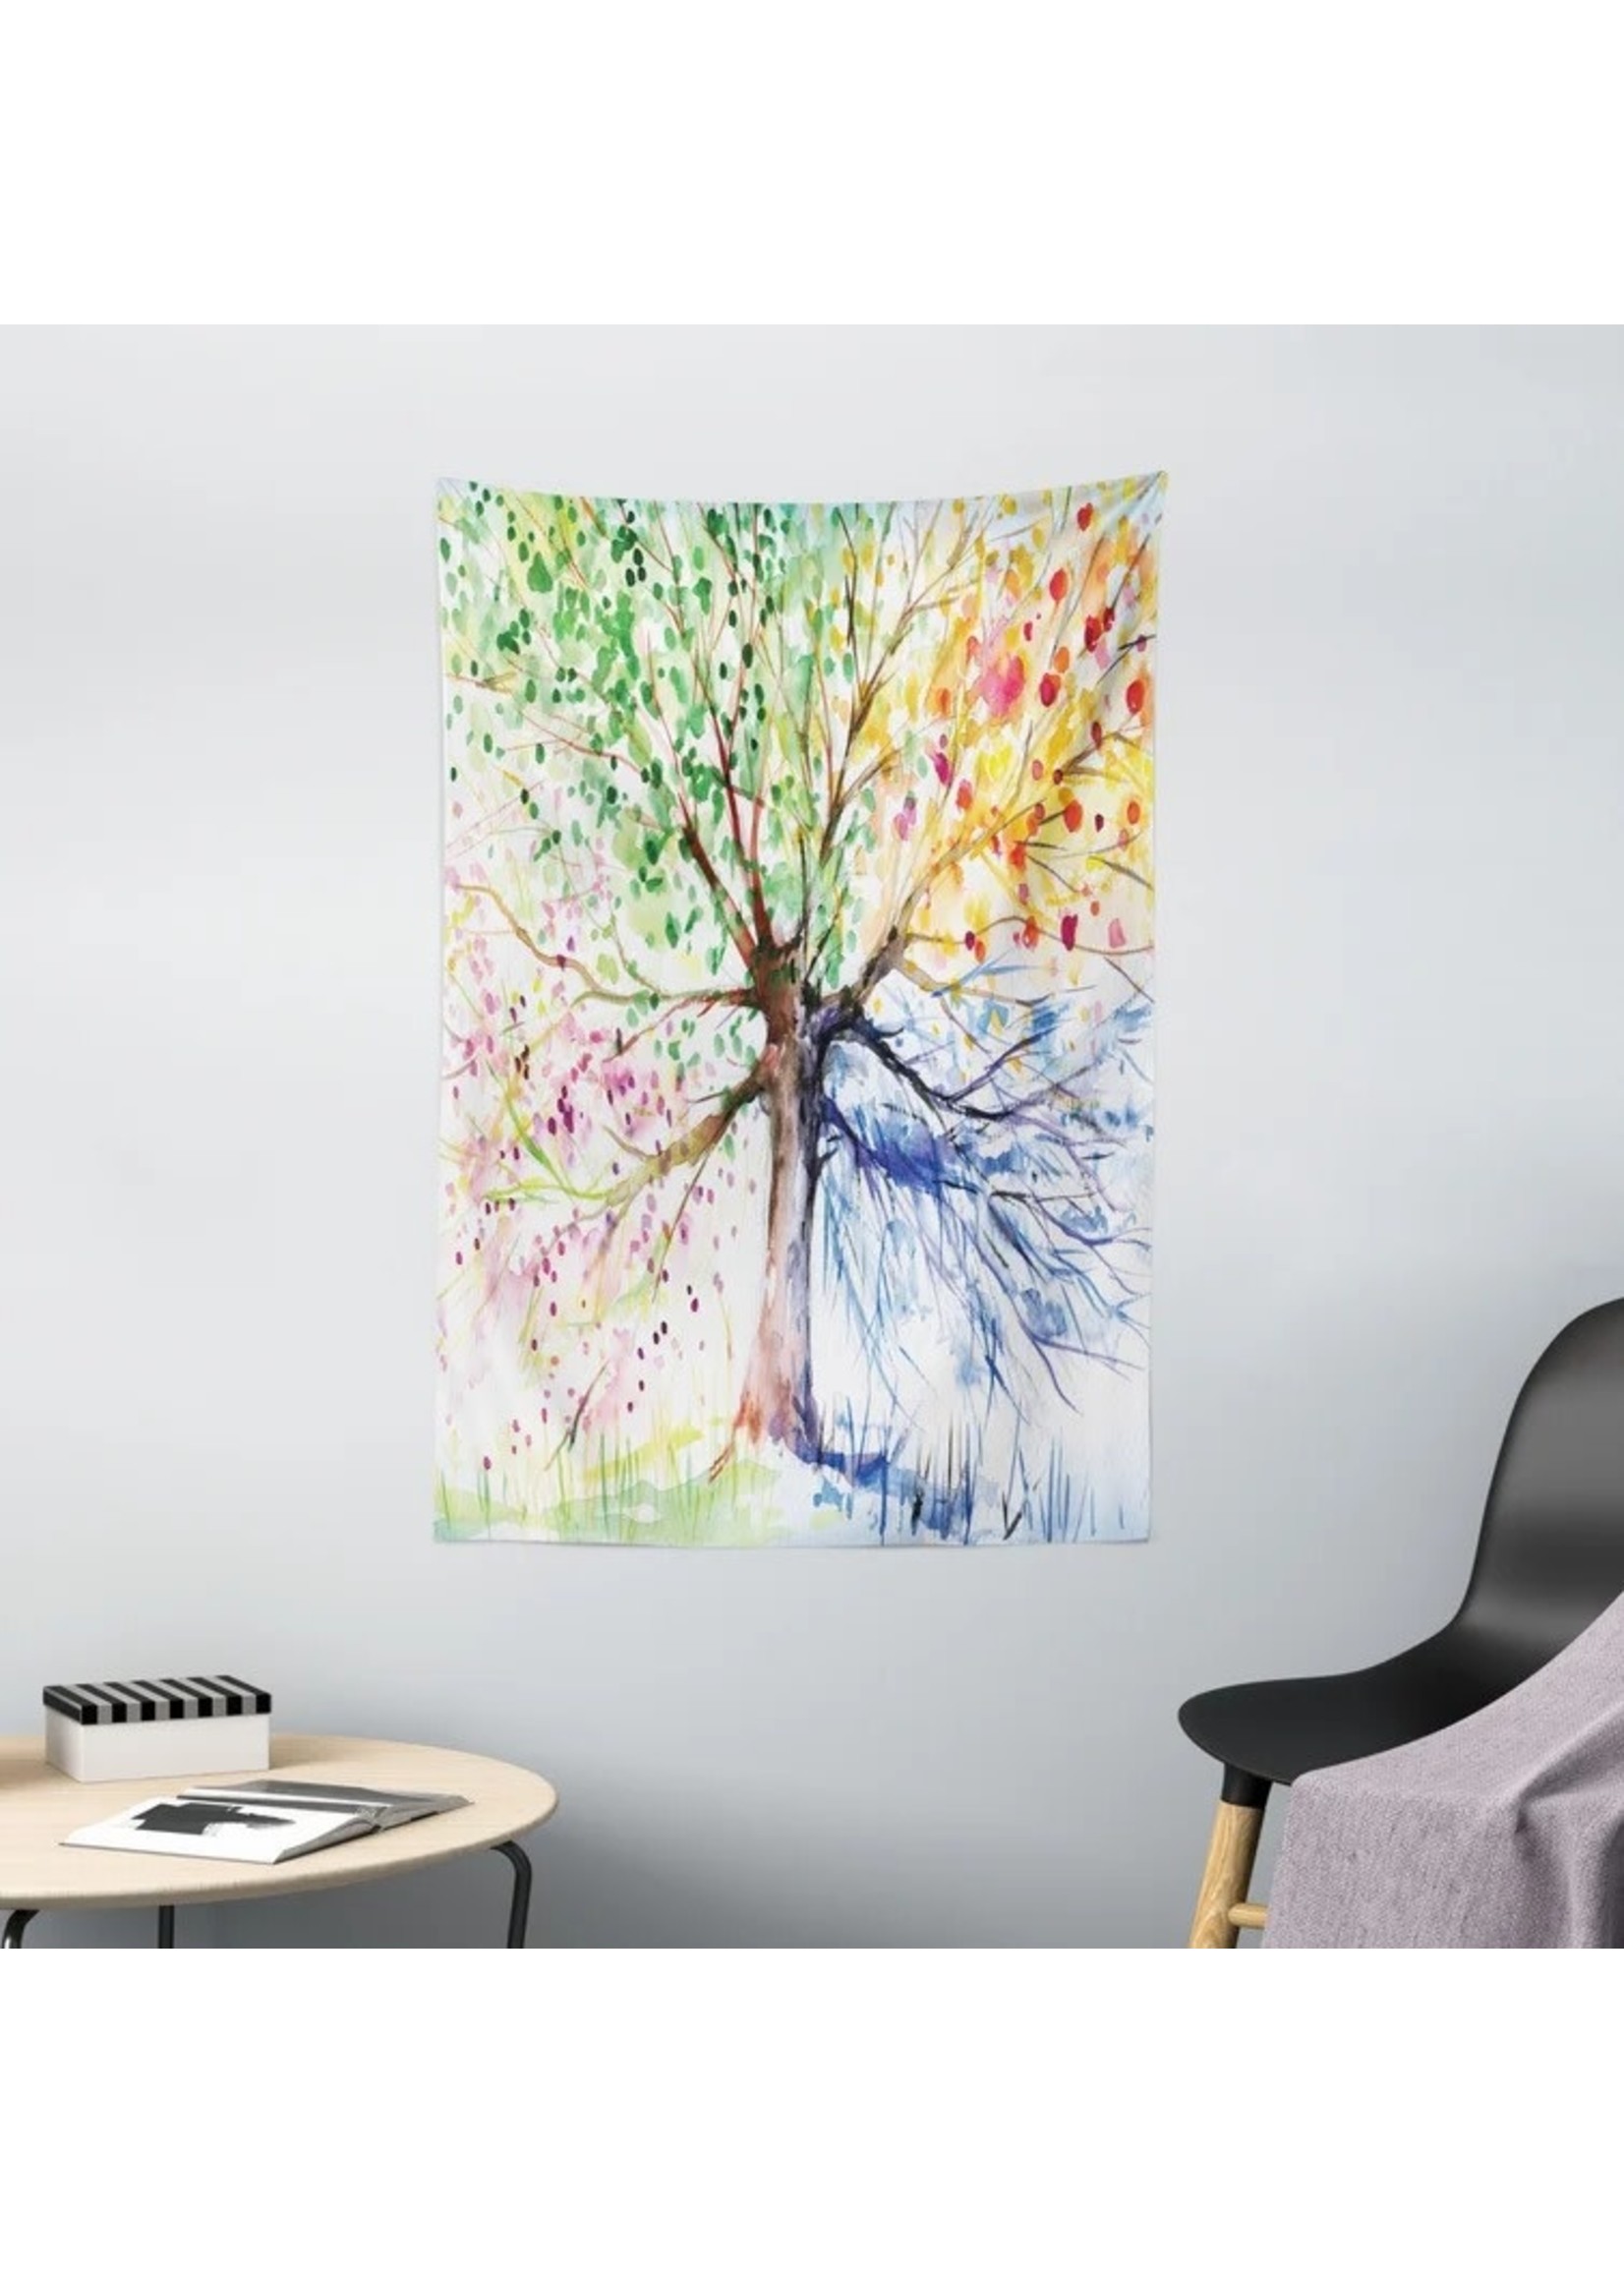 *Ambesonne Tree Tapestry, Watercolor  4 Seasons Print, Wall Hanging Decor